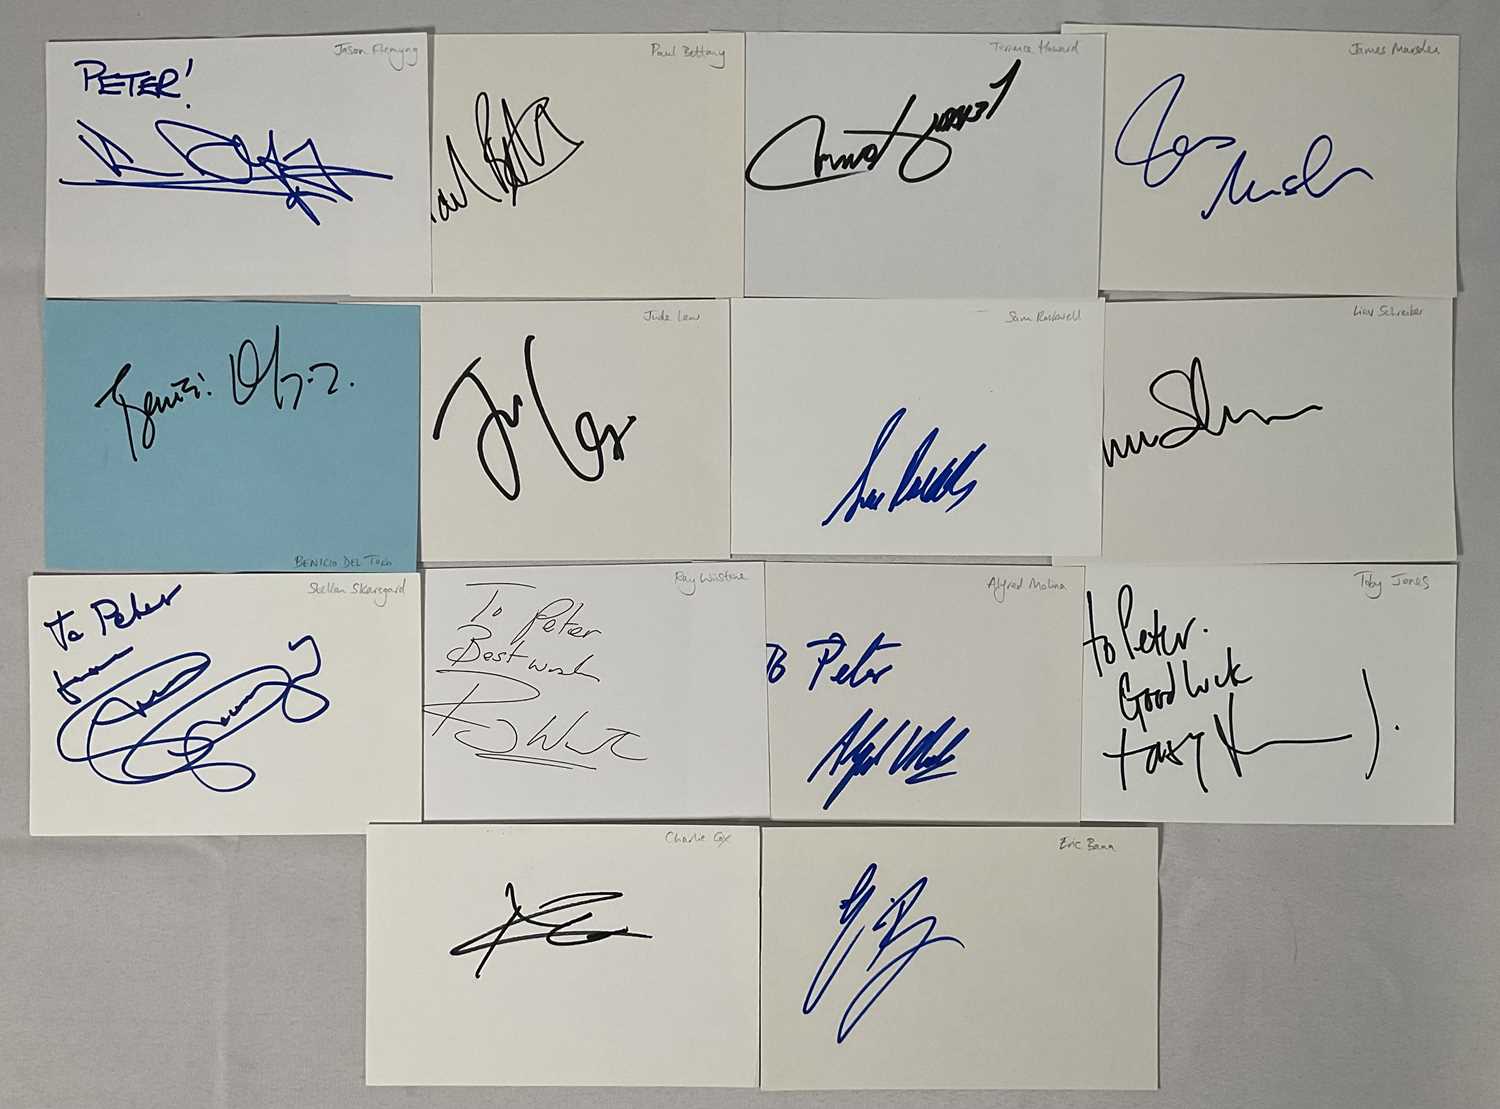 A group of autograph cards signed by actors who have appeared in Marvel movies comprising of PAUL